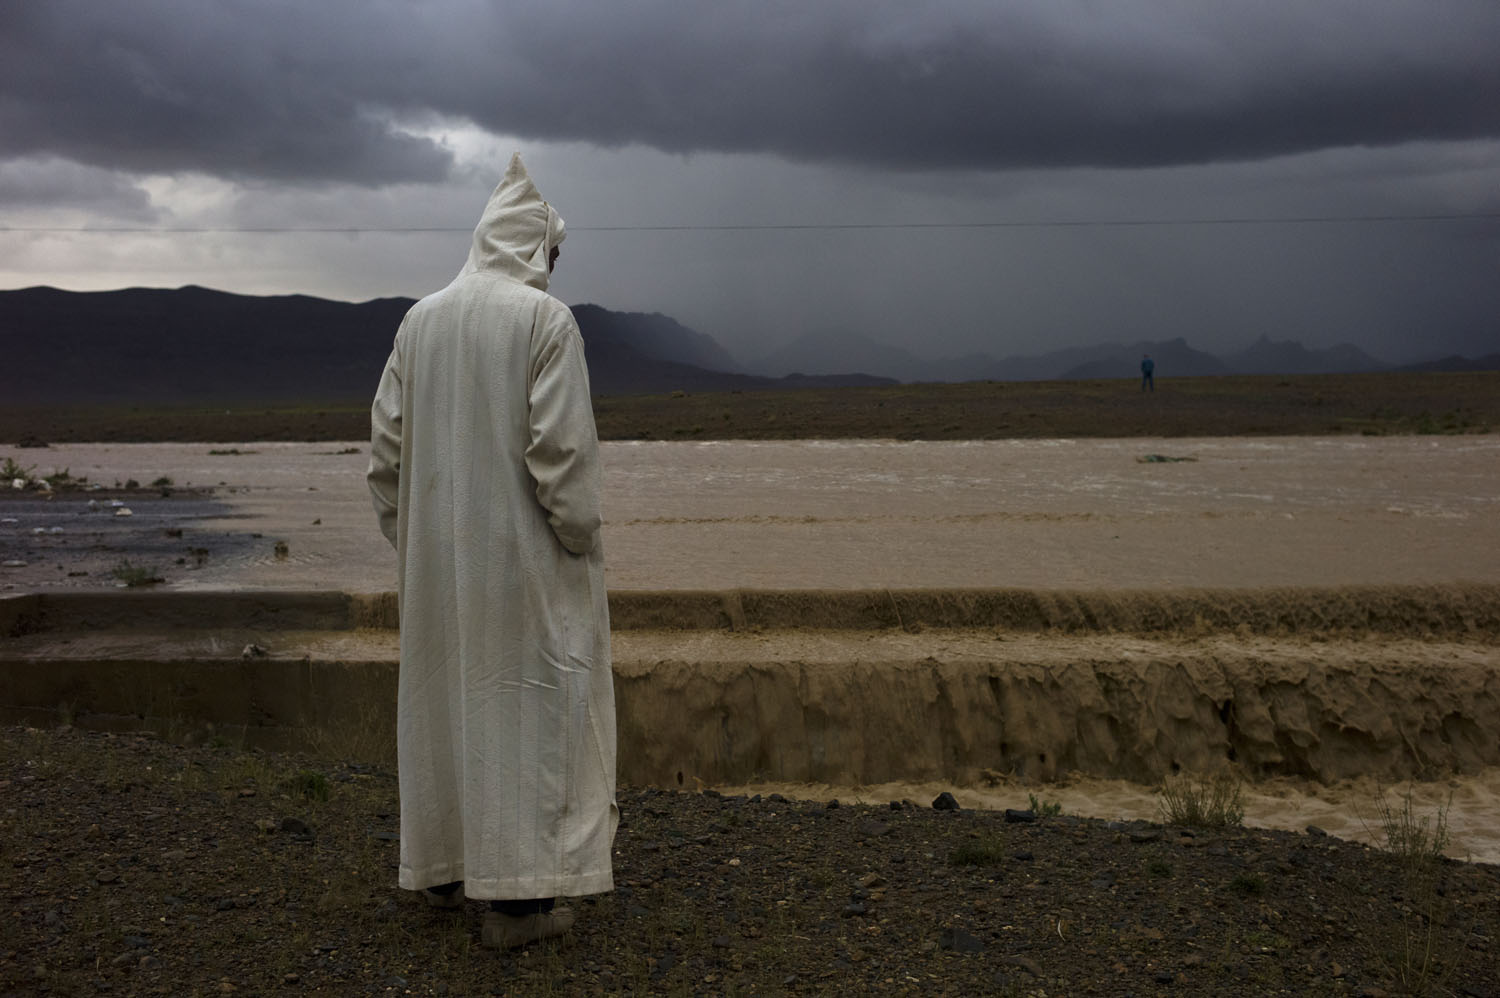 Morocco, 2011. 
                              A passenger of a bus waits while a flash flood takes out the road ahead of them near the northern edge of the Sahara desert in present-day Morocco